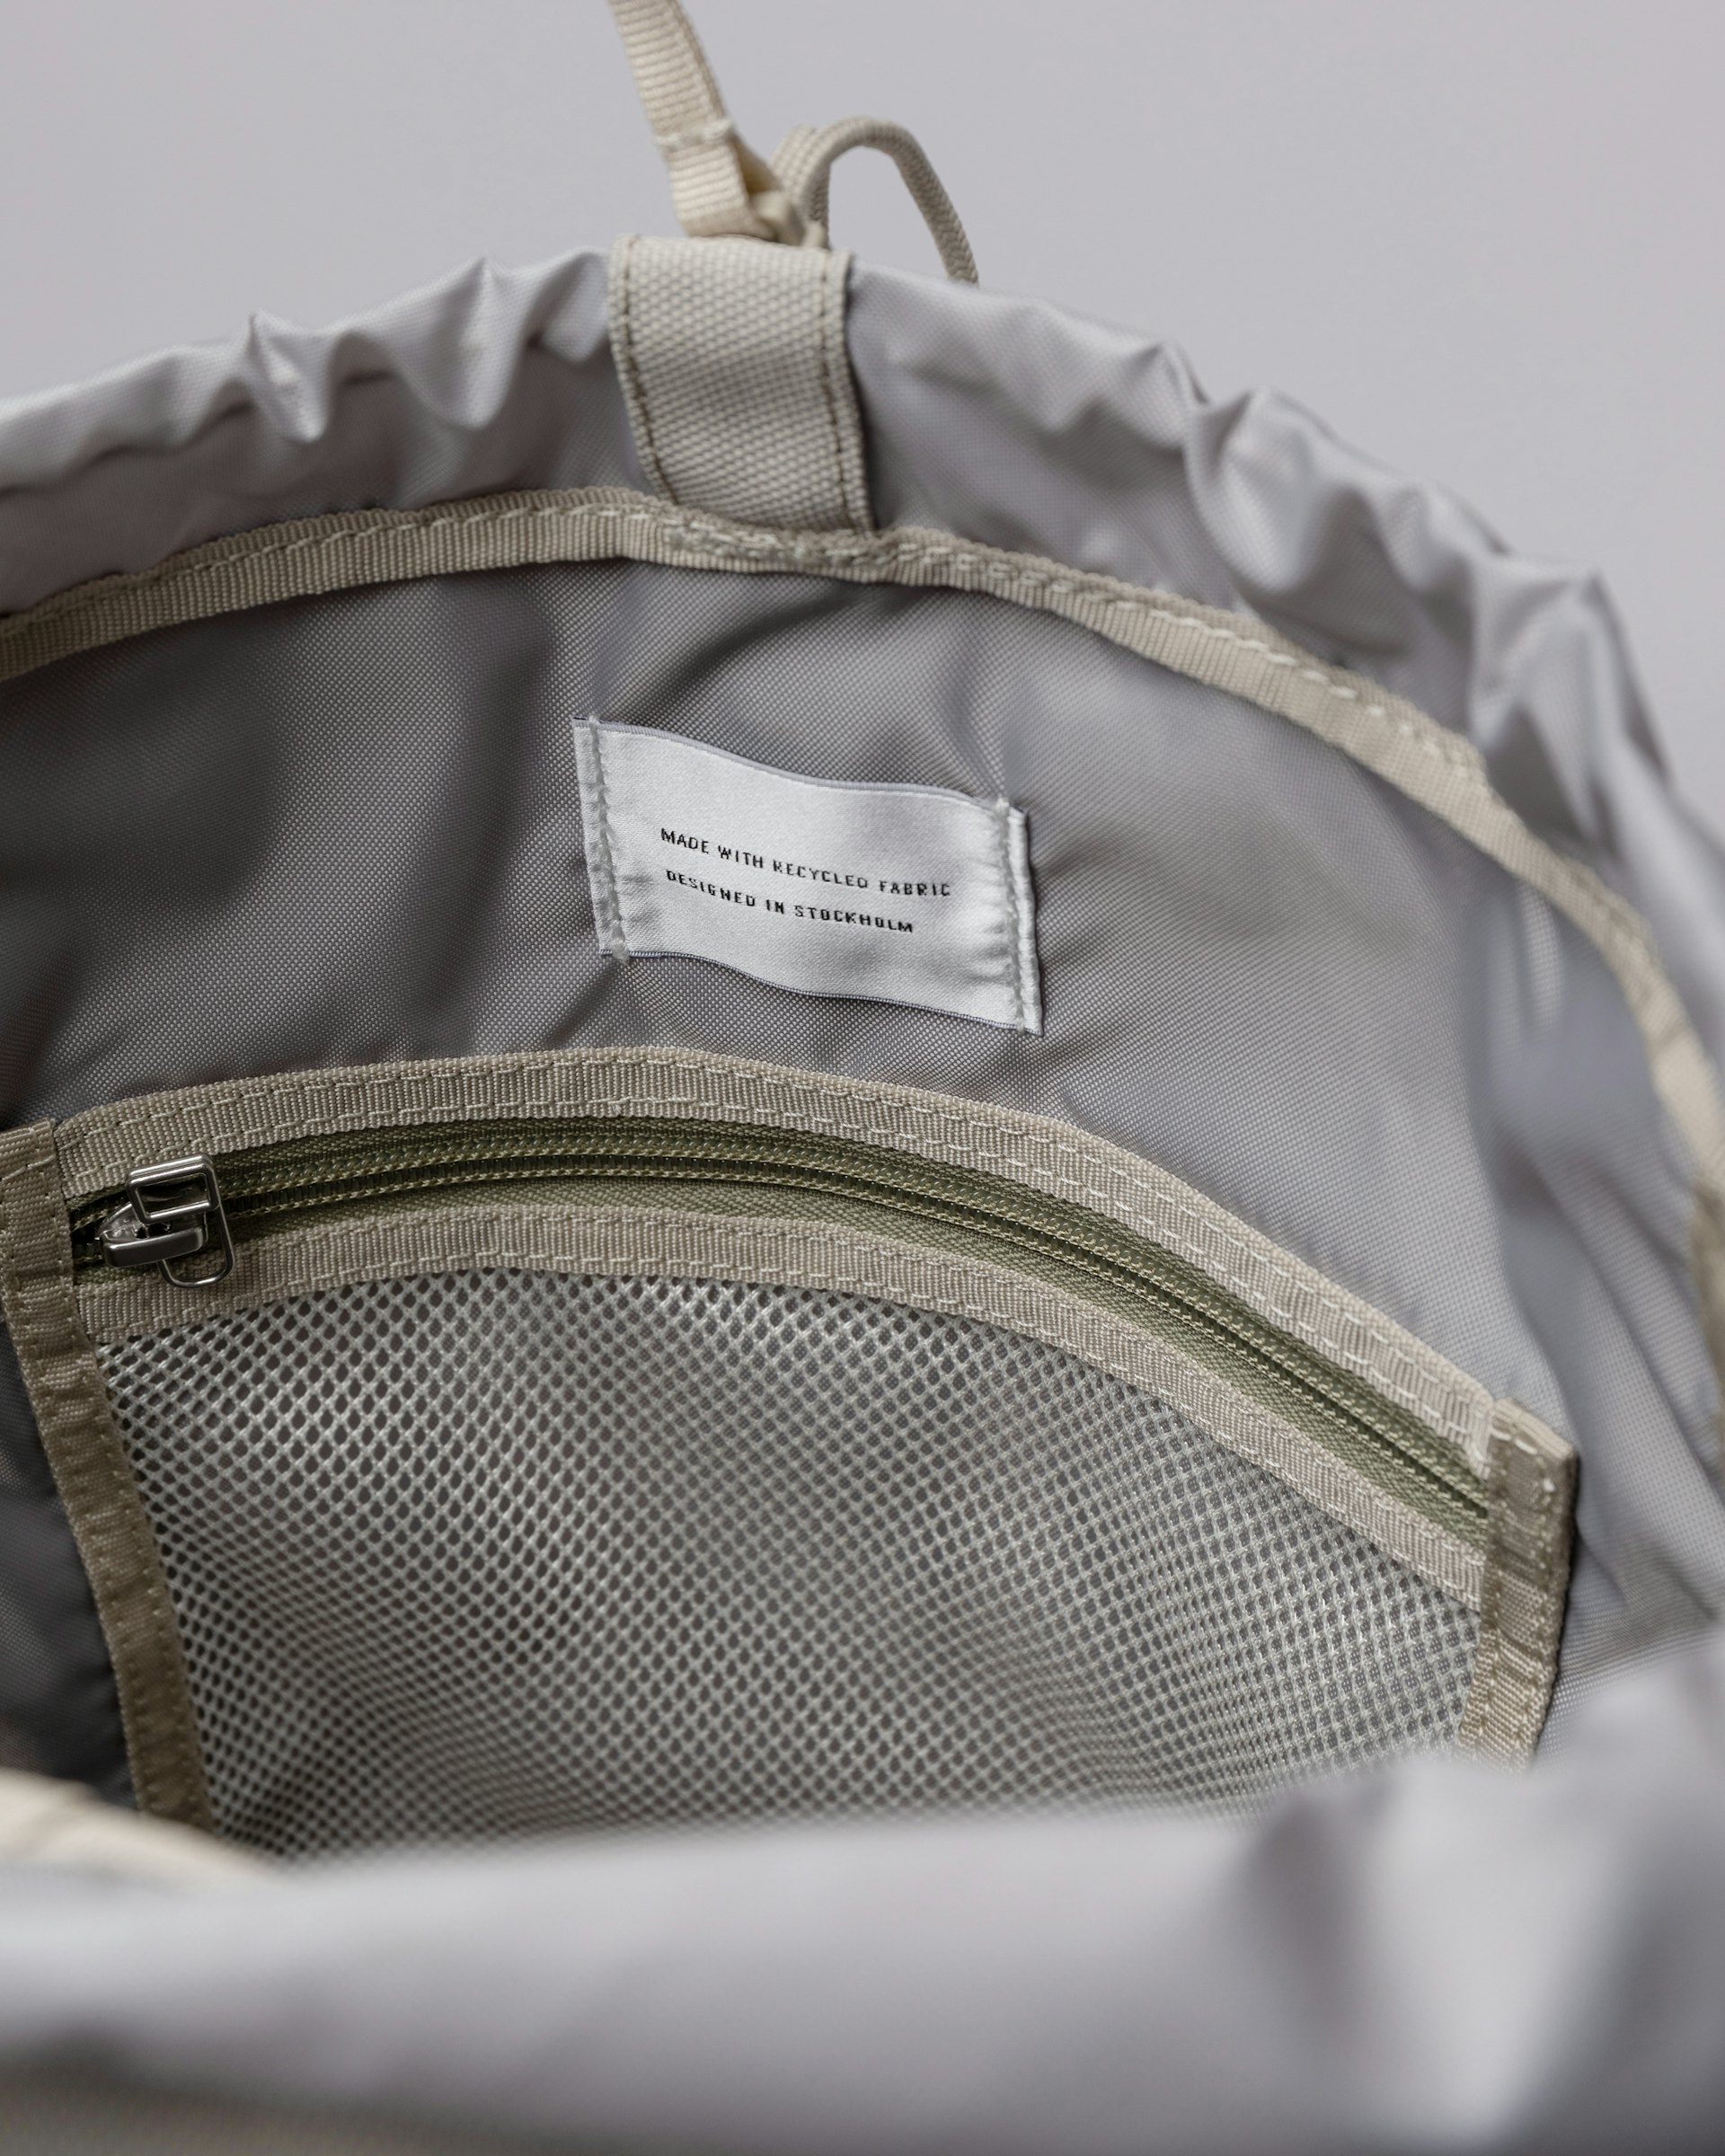 Walter belongs to the category Backpacks and is in color pale birch light & pale birch dark (9 of 9)